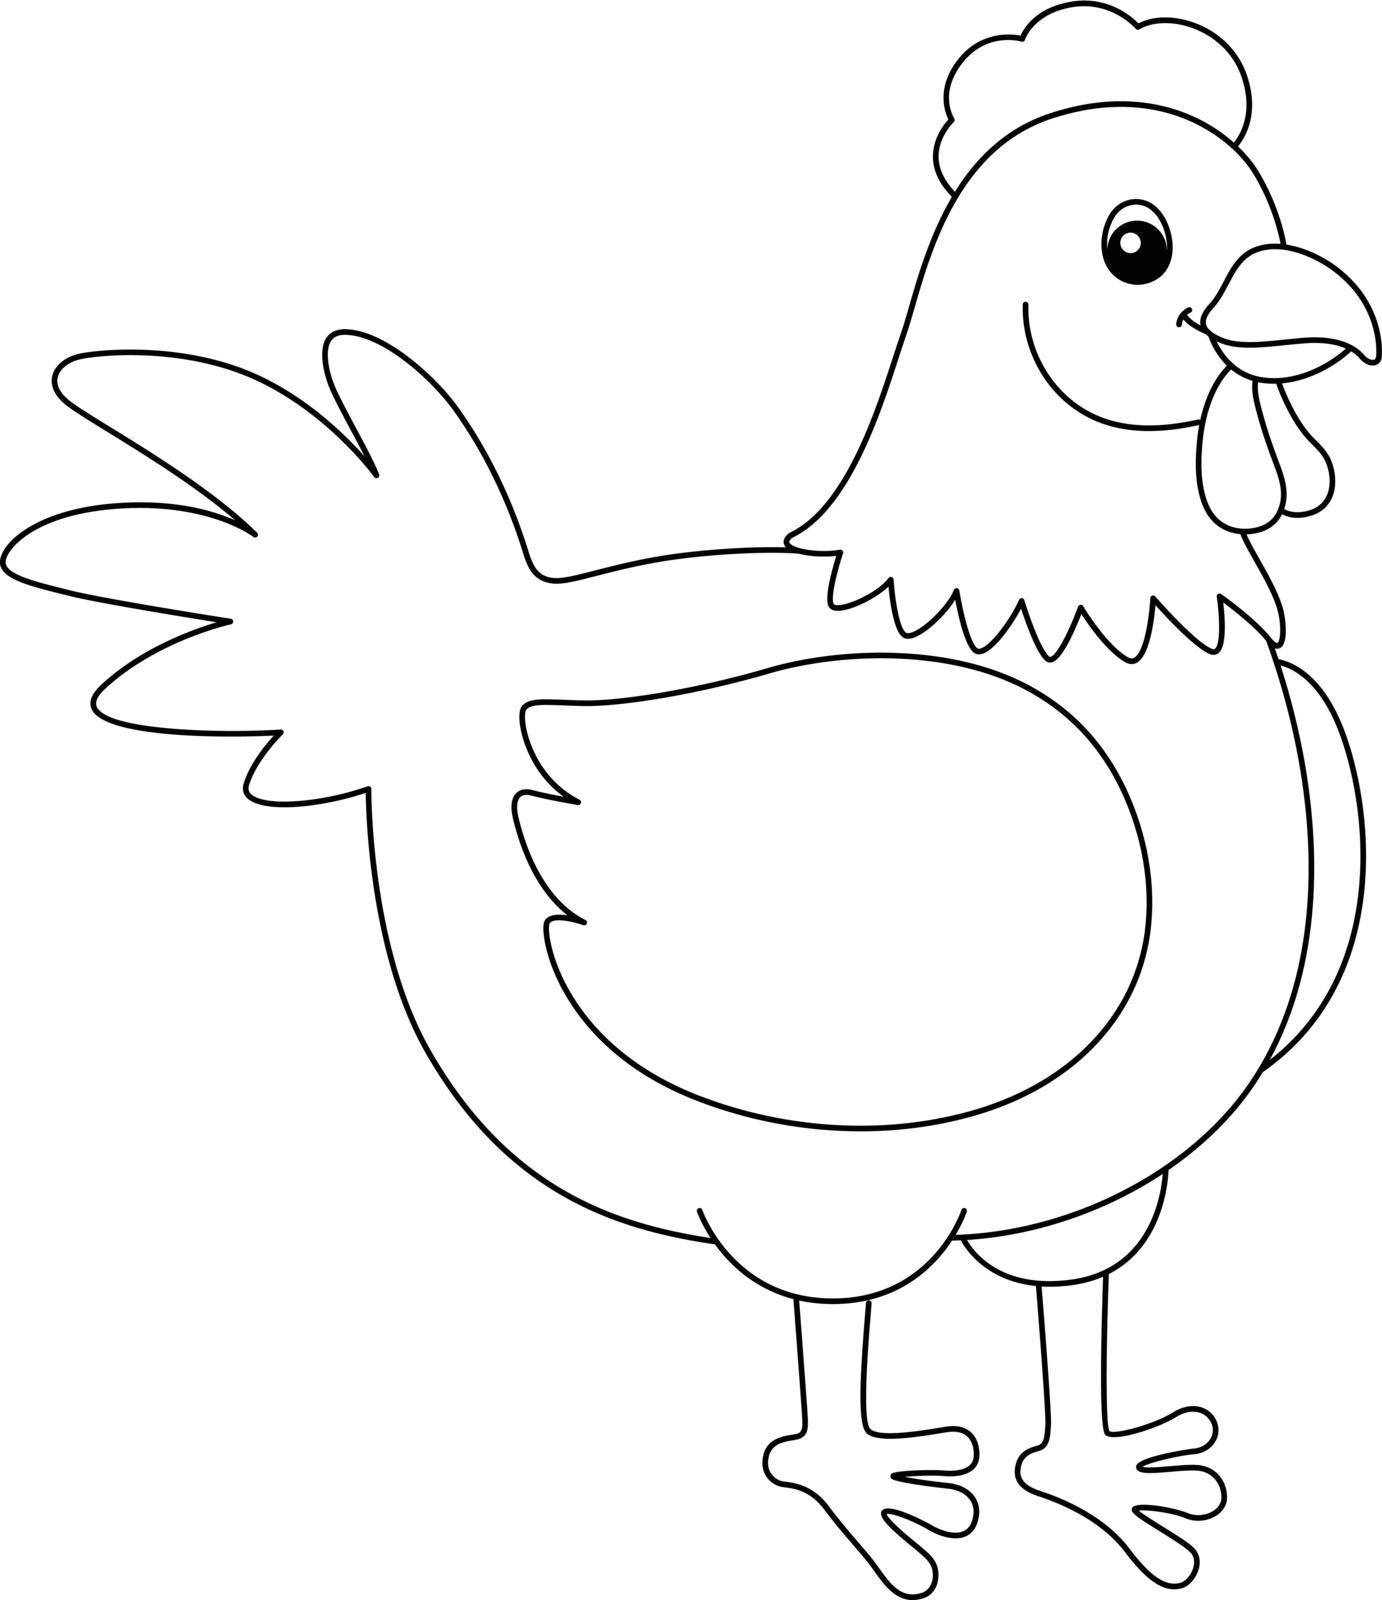 A cute and funny coloring page of a chicken. Provides hours of coloring fun for children. To color, this page is very easy. Suitable for little kids and toddlers.